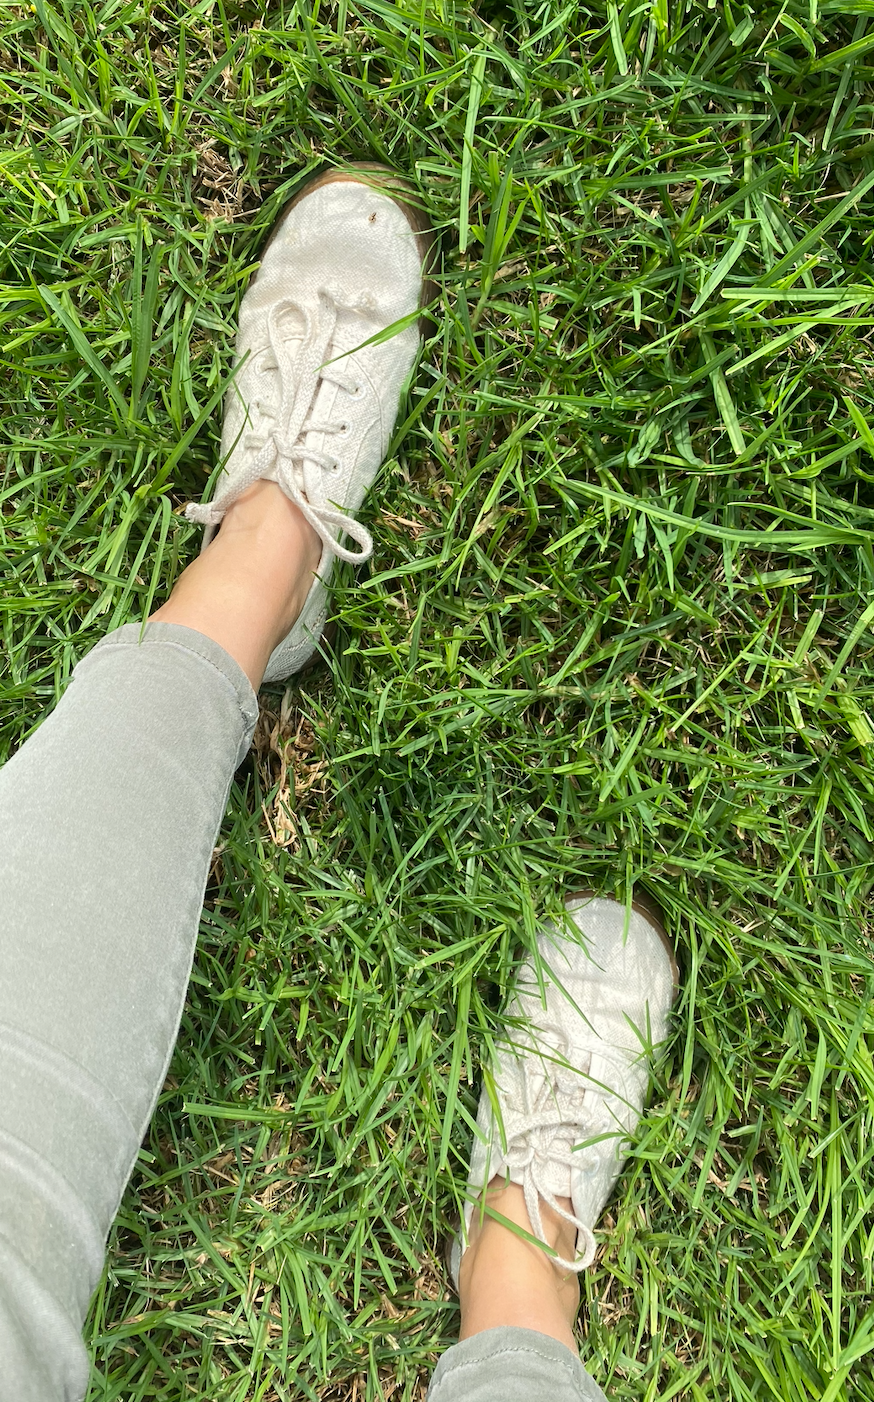 Krista's shoes in the grass